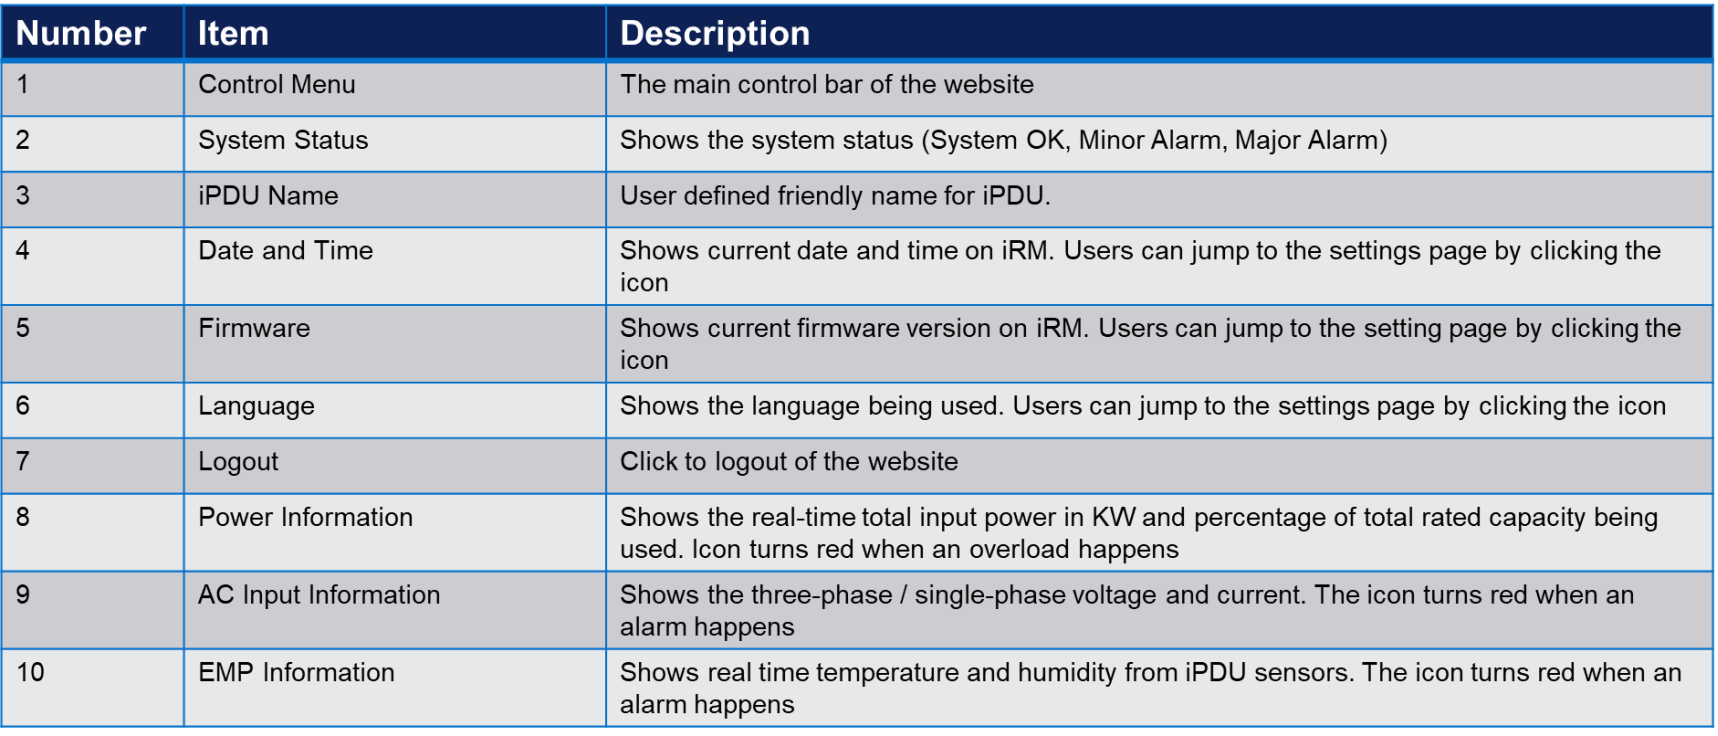 Table describing the main elements shown on the Power Consumption Dashboard landing page